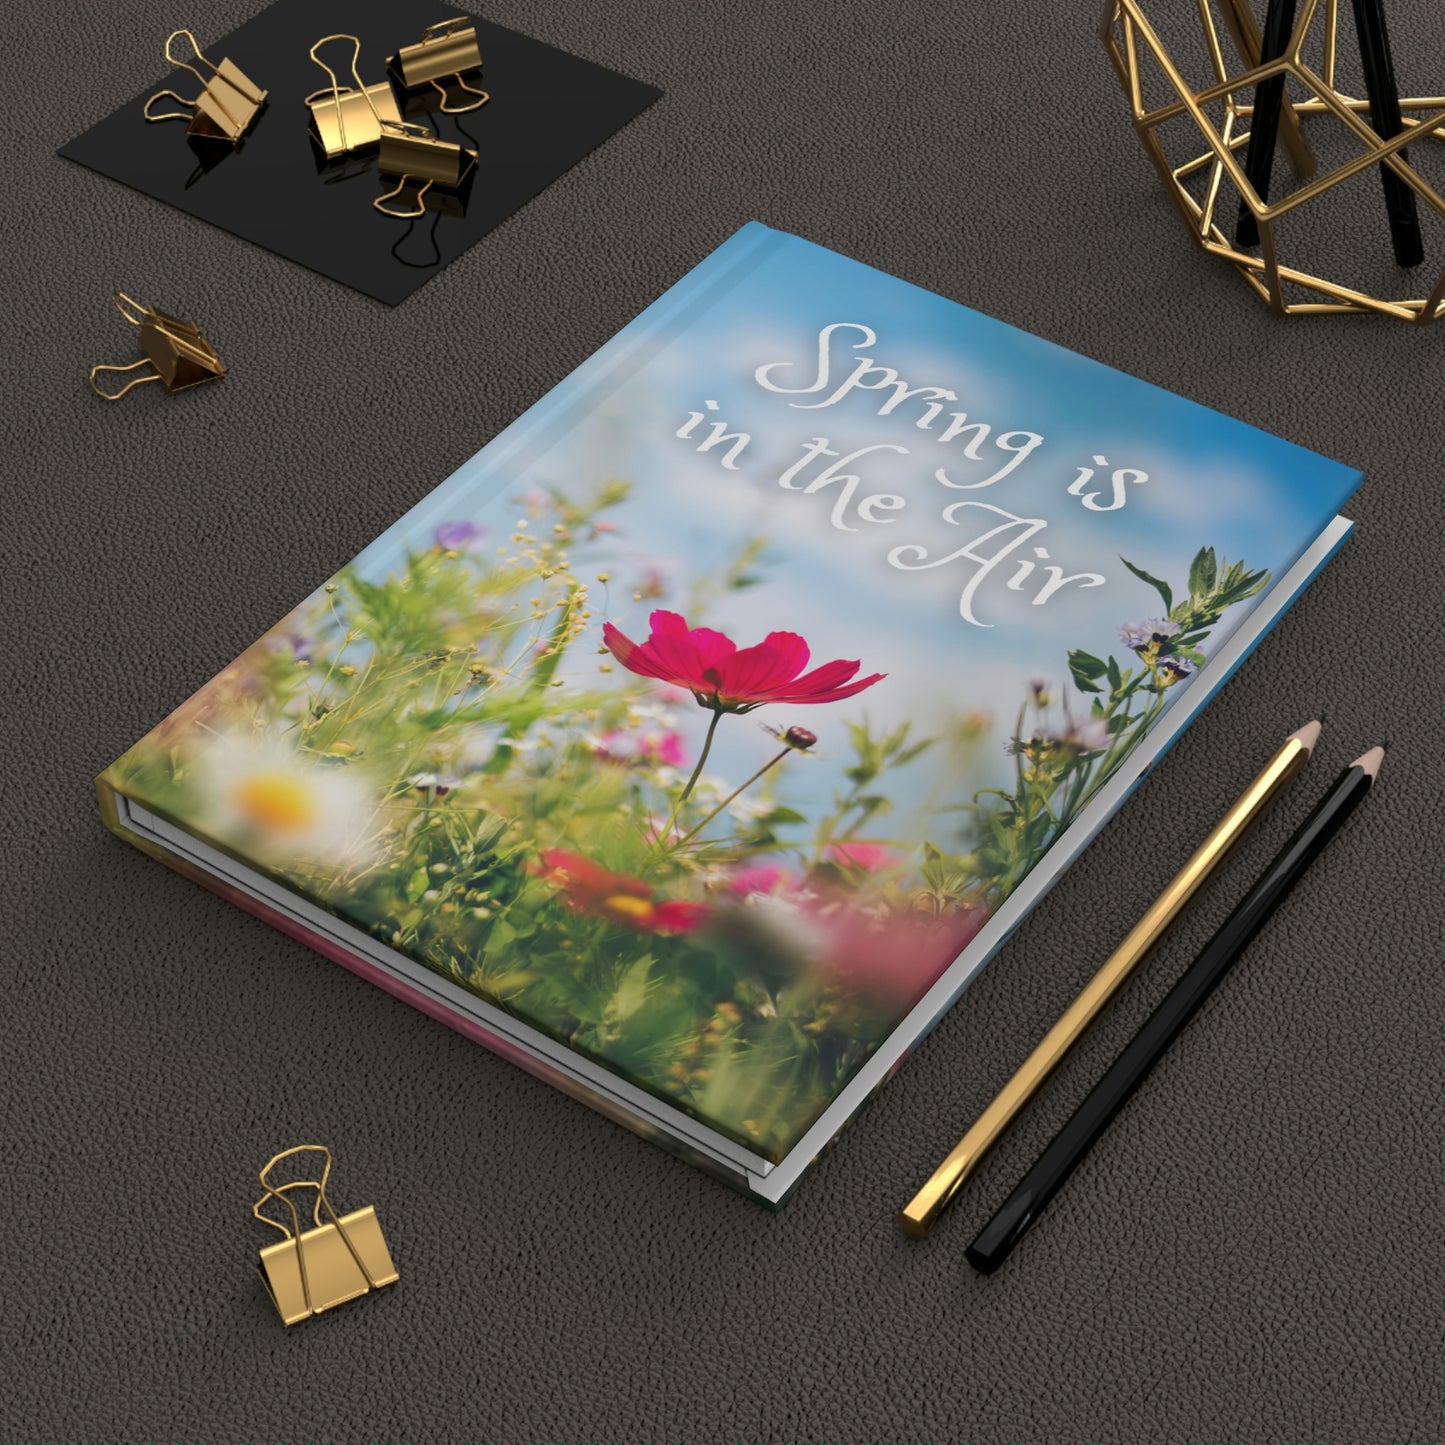 Spring is in the Air Notebook Book Hardcover Journal Matte